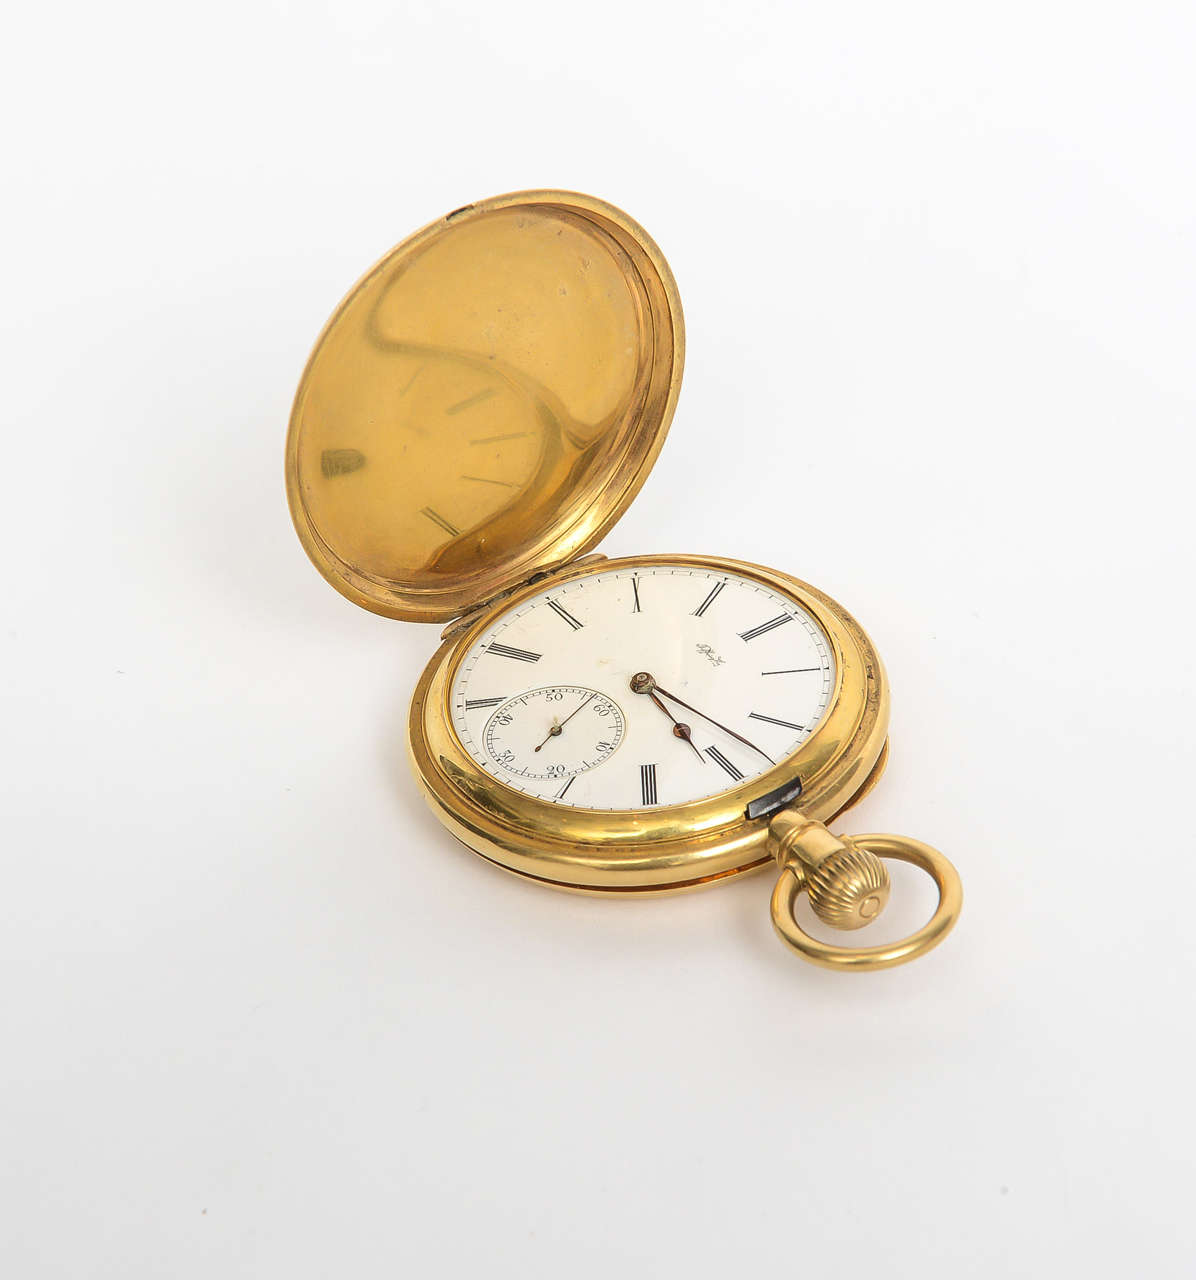 18-karat yellow gold pocket, made by Tiffany & Co. Round white ceramic dial with black Roman numerals a steel hands. With second-hand single sunk sub dial with Arabic numbers. With key less hunting case measuring 47MM in diameter. Case number is